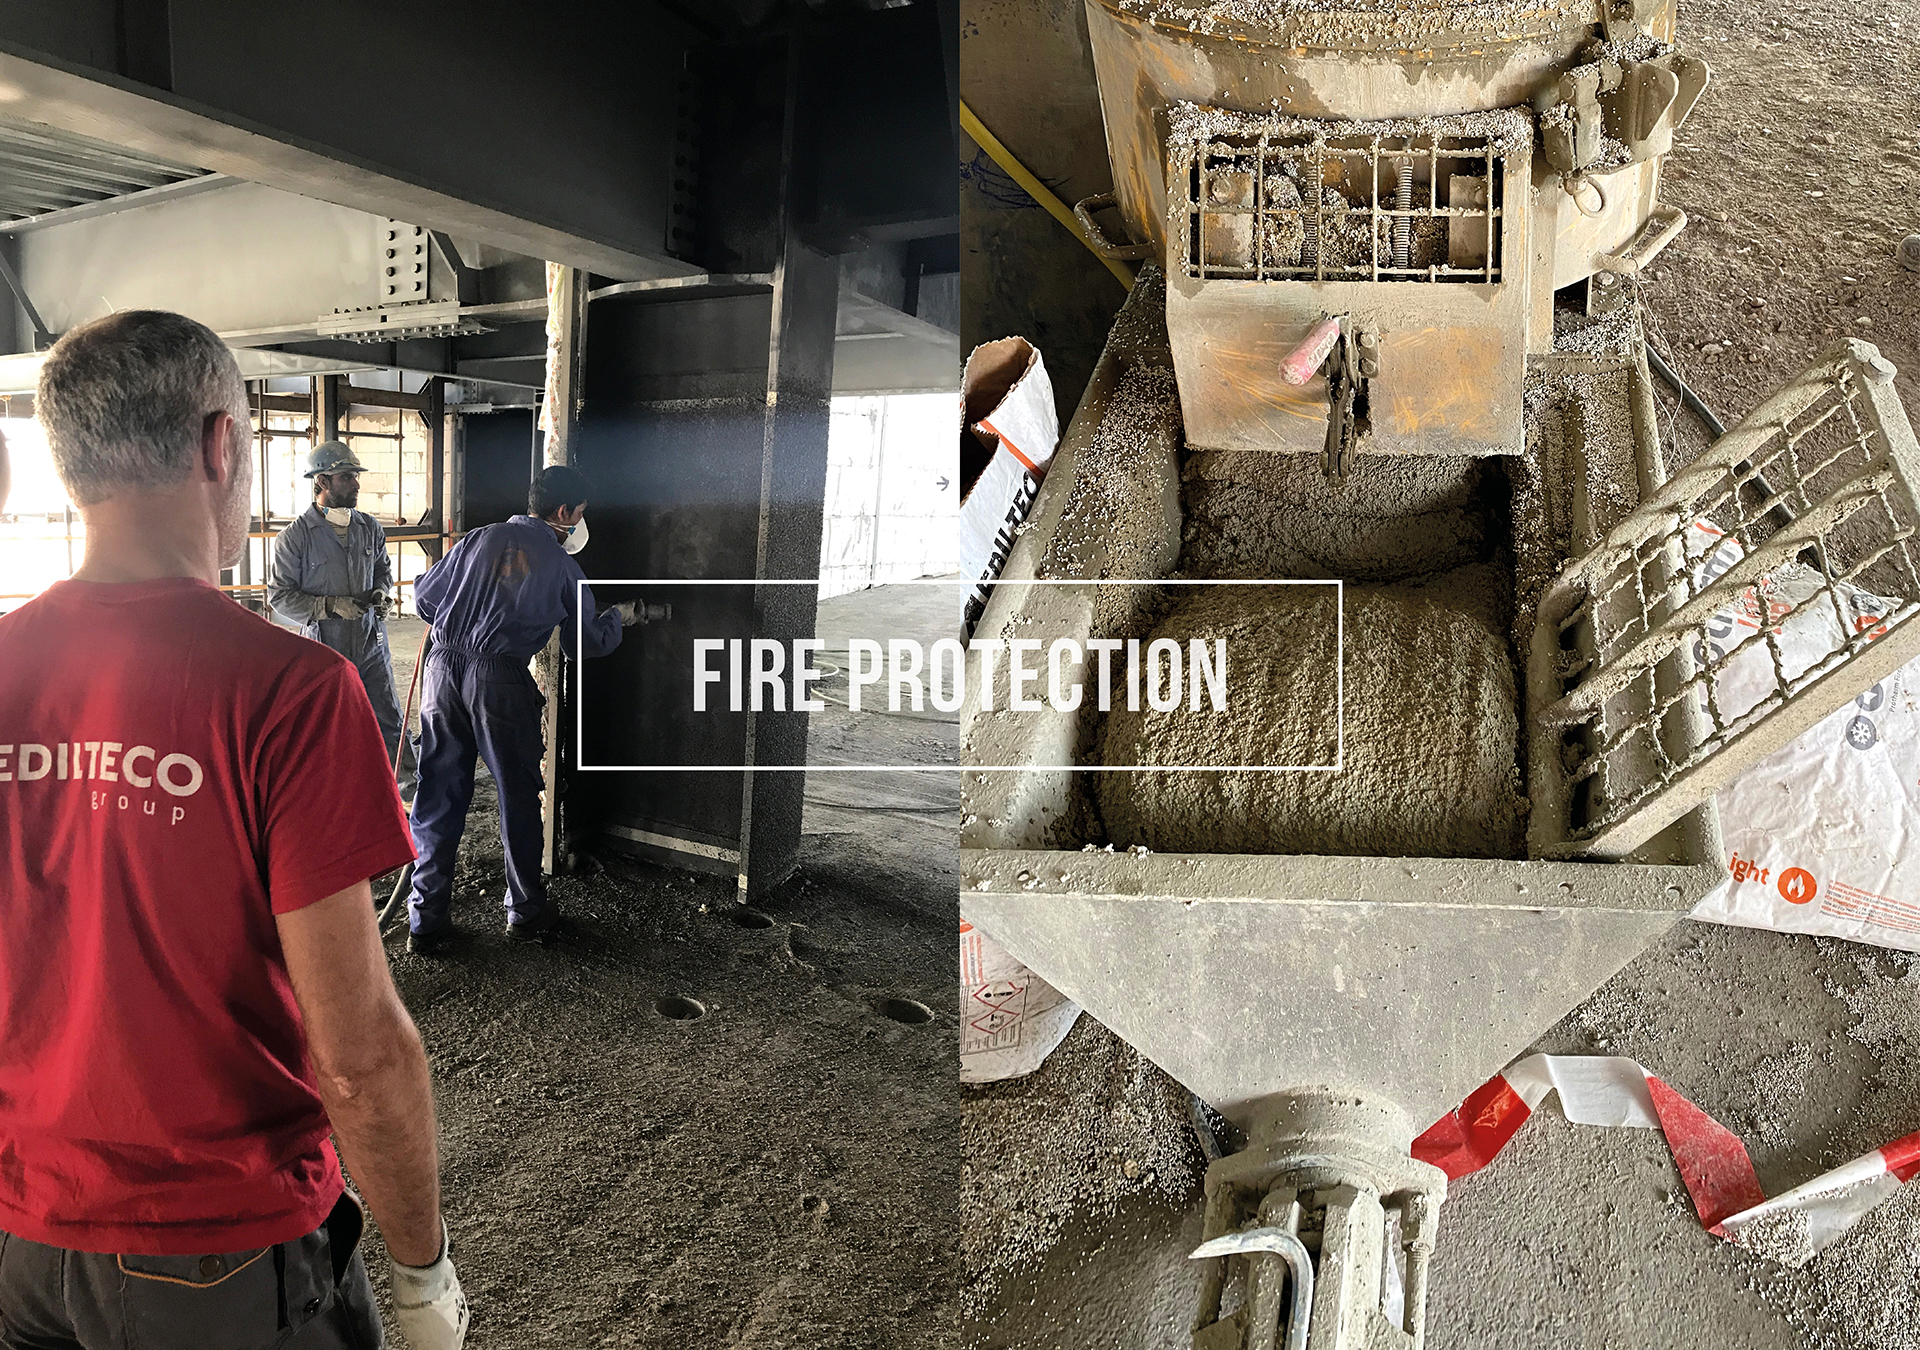 PROTHERM LIGHT - Fireproofing Division